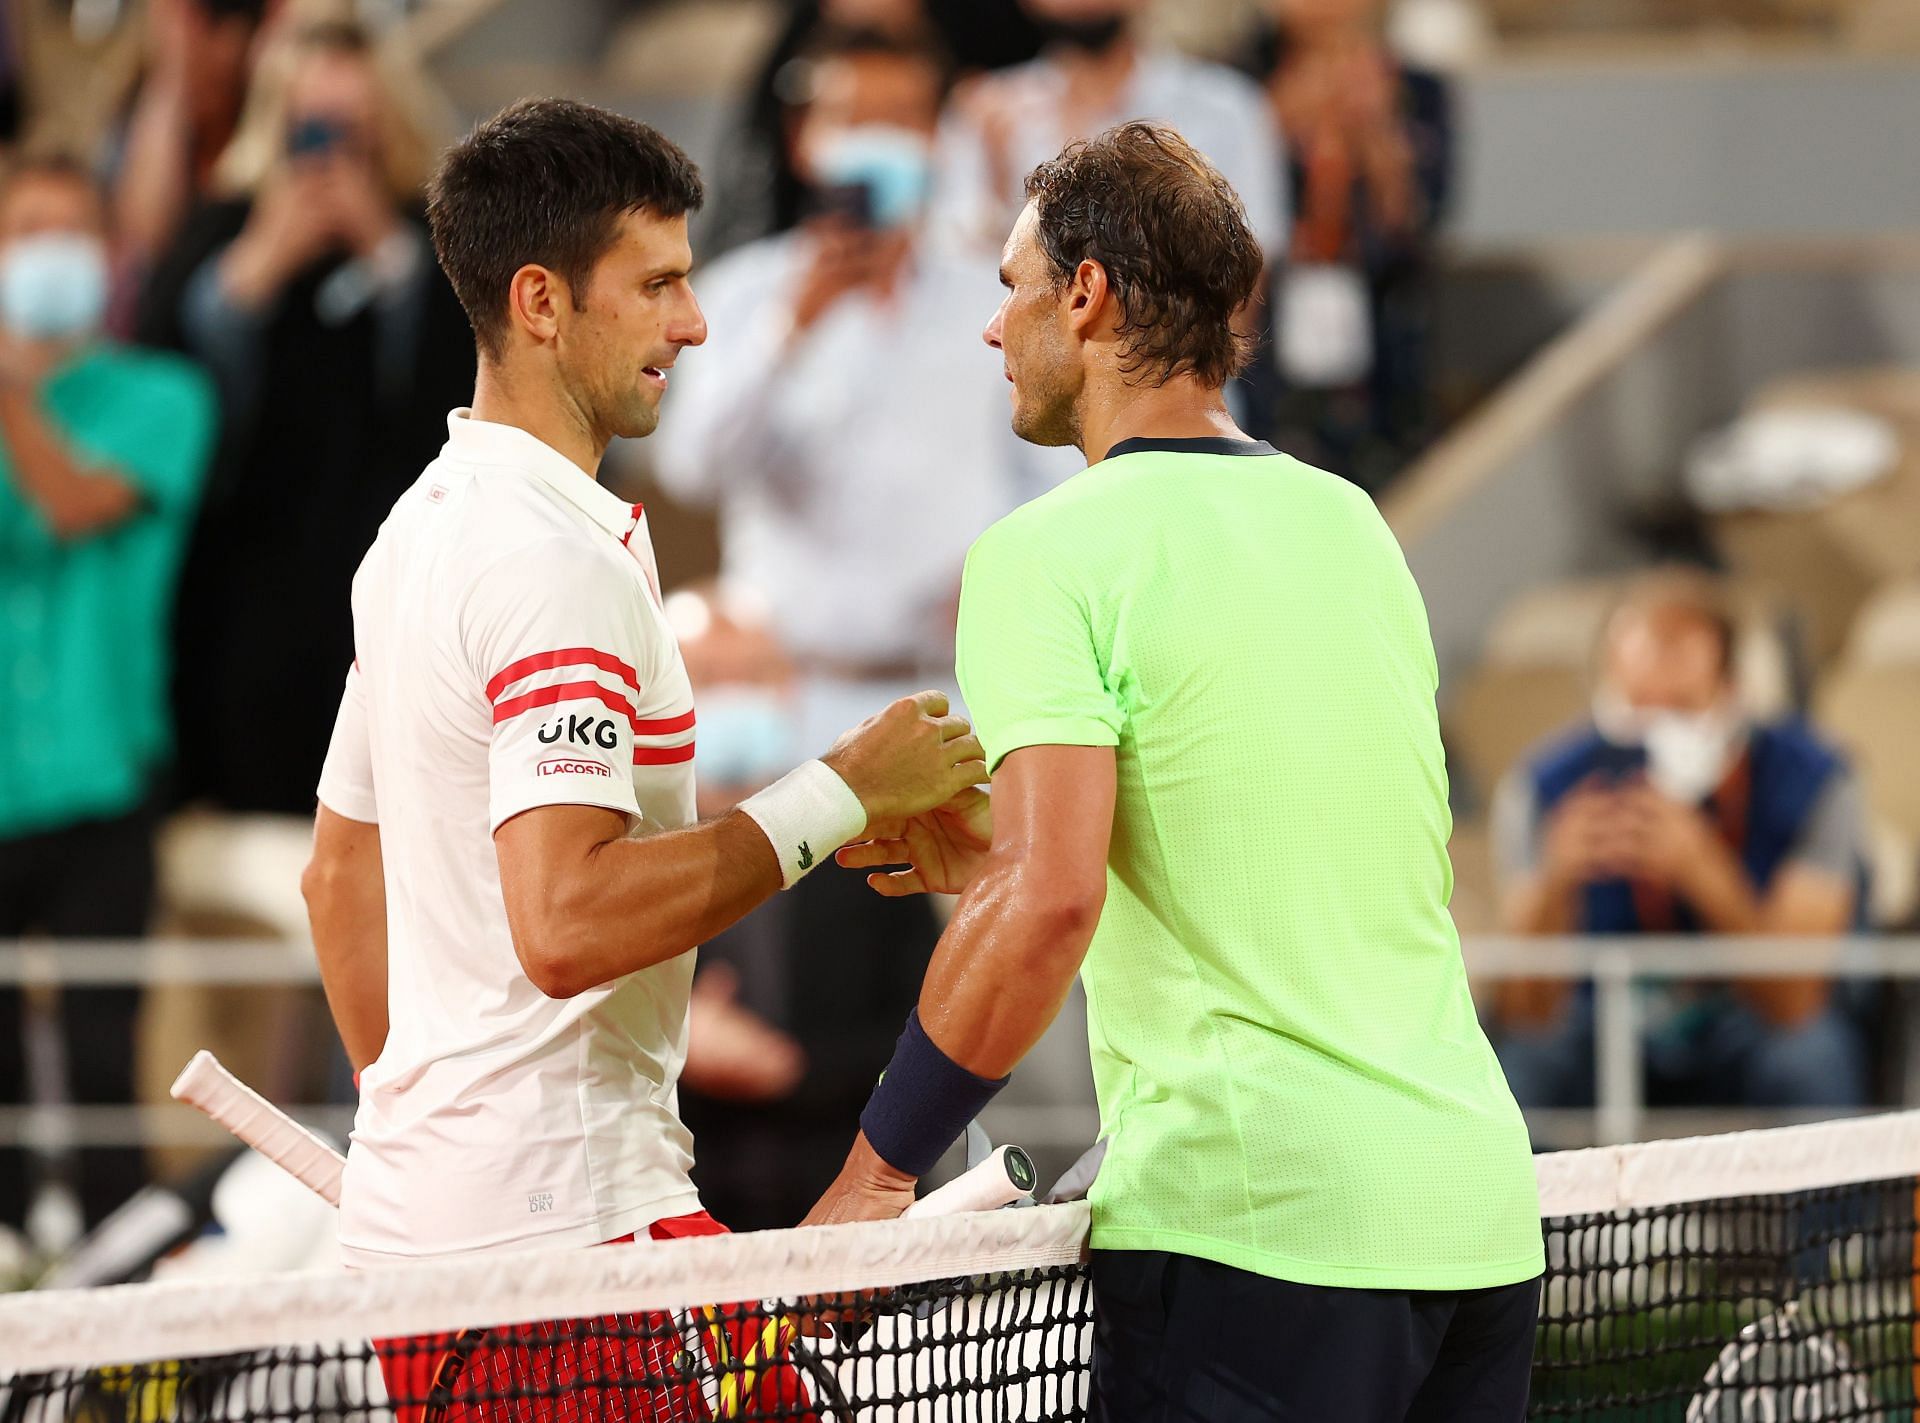 Novak Djokovic thwarted Rafael Nadal from winning his 21st Grand Slam at the 2021 French Open